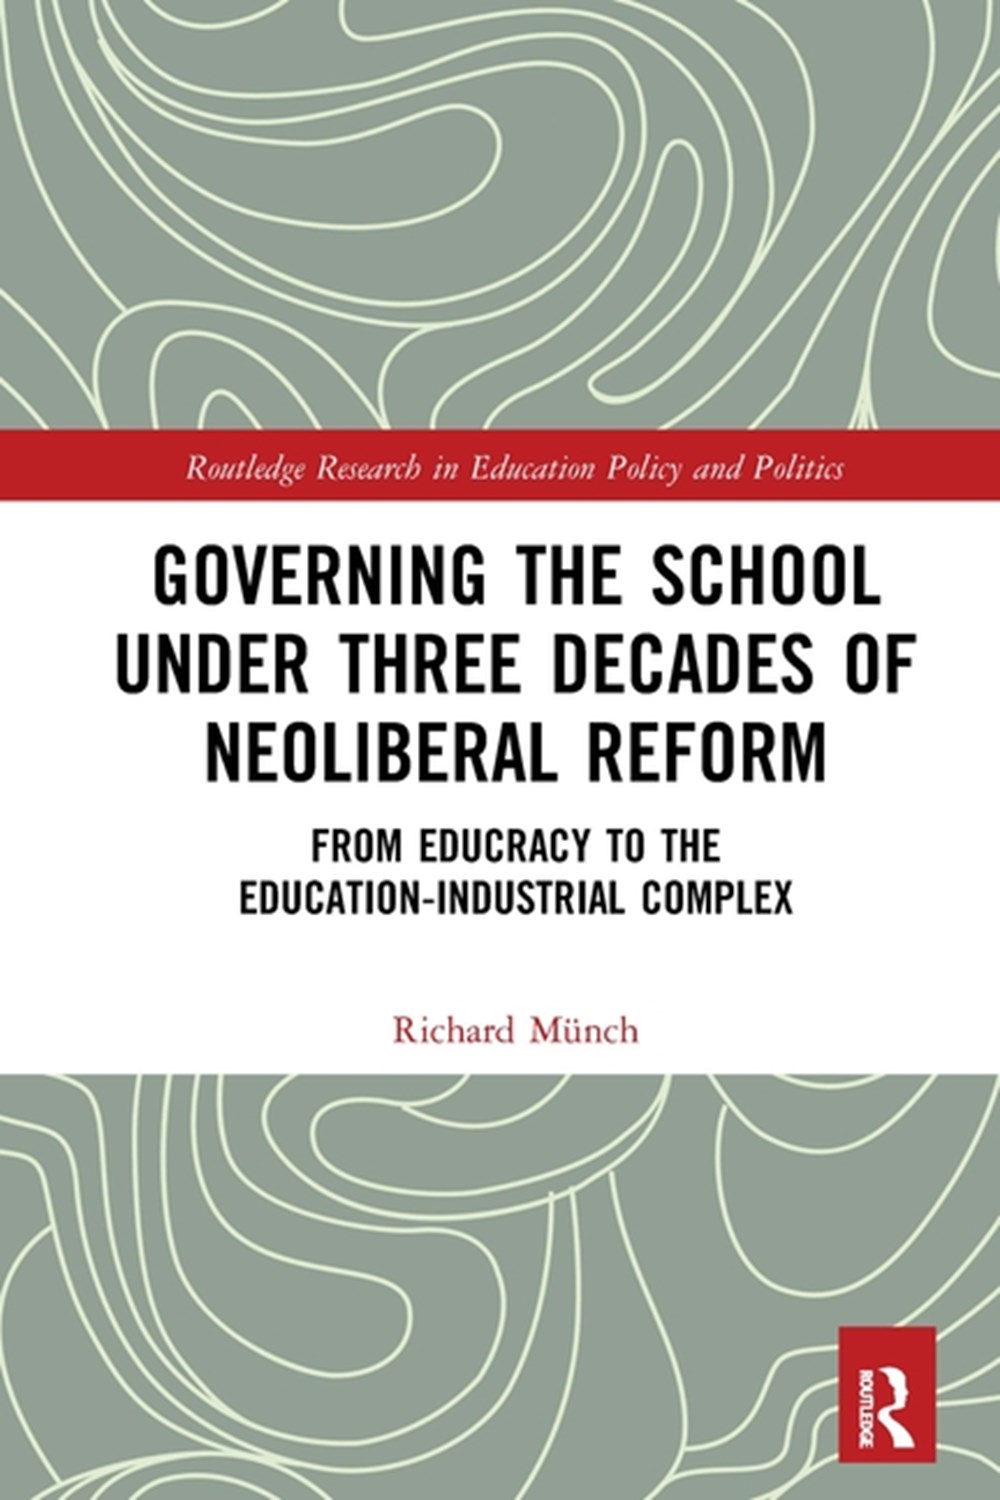 Governing the School under Three Decades of Neoliberal Reform: From Educracy to the Education-Indust